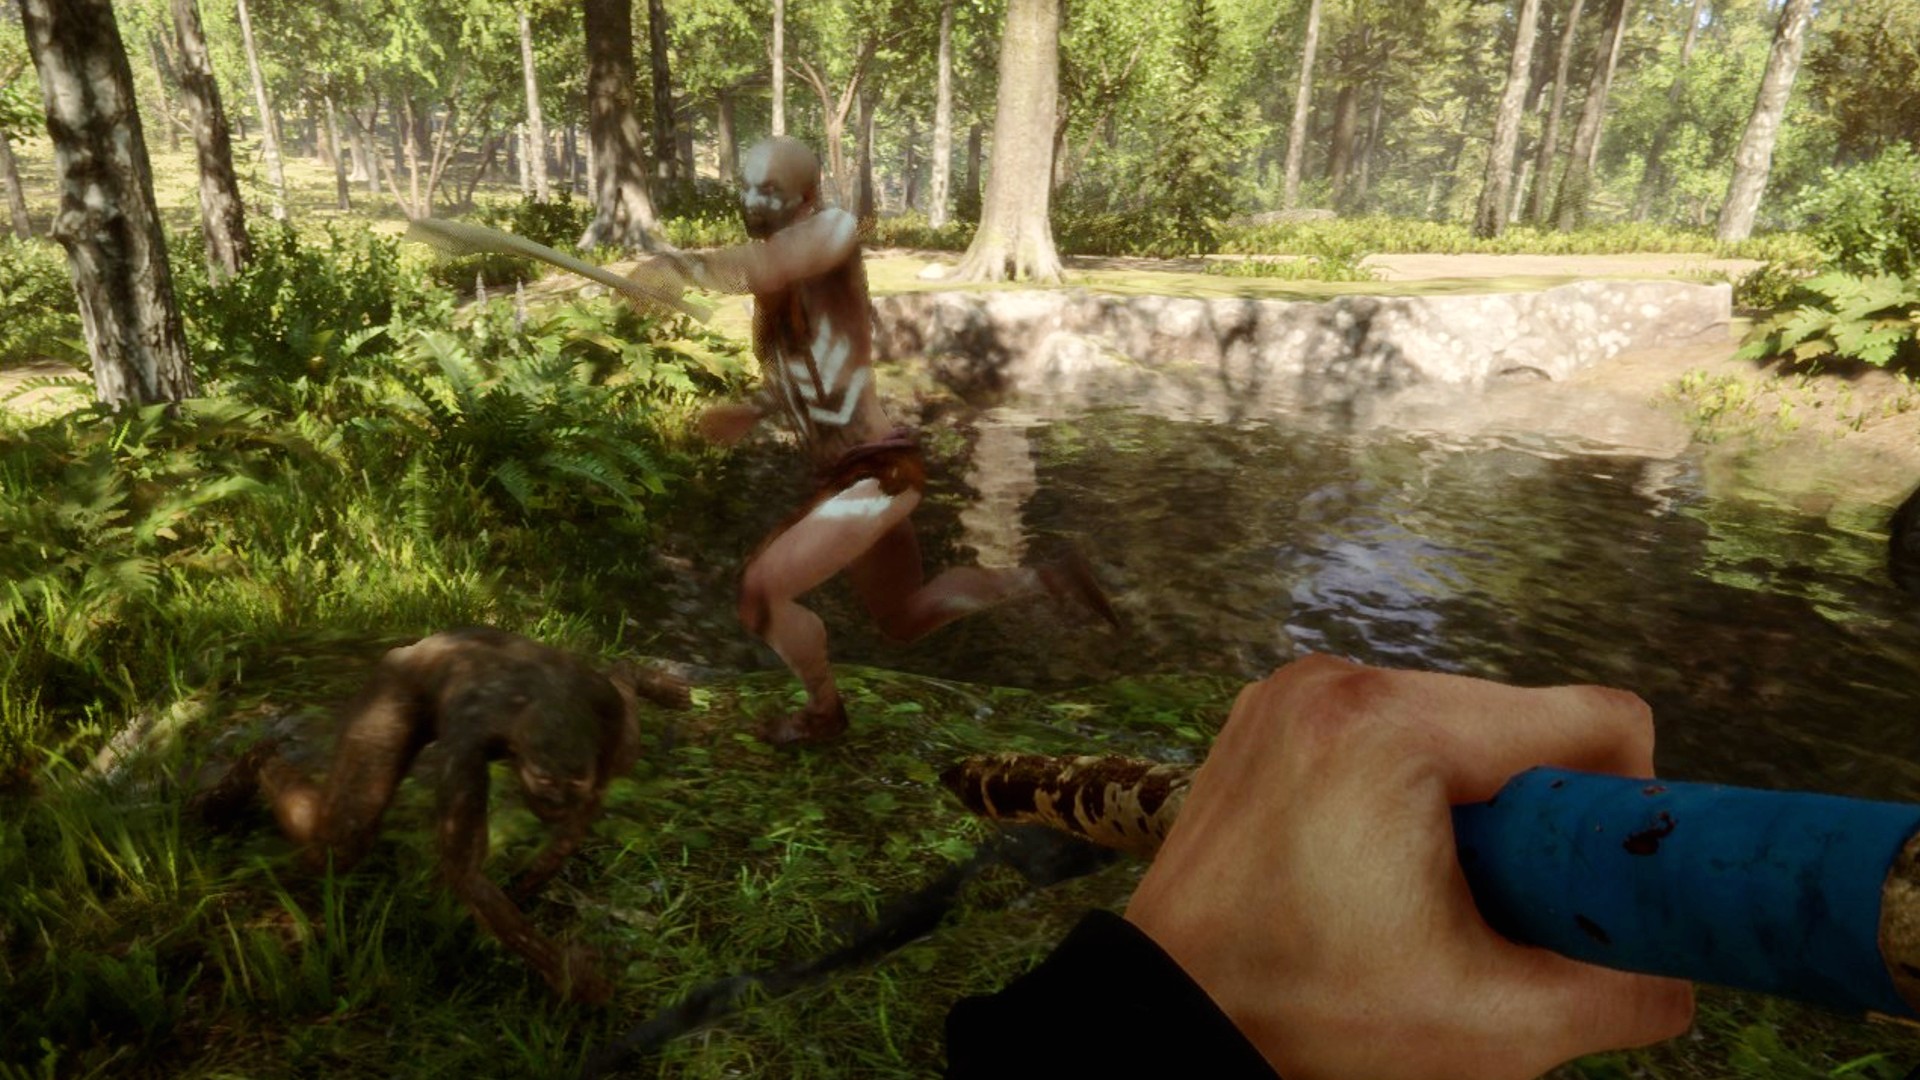 Sons of the Forest solves the survival game grind by letting you